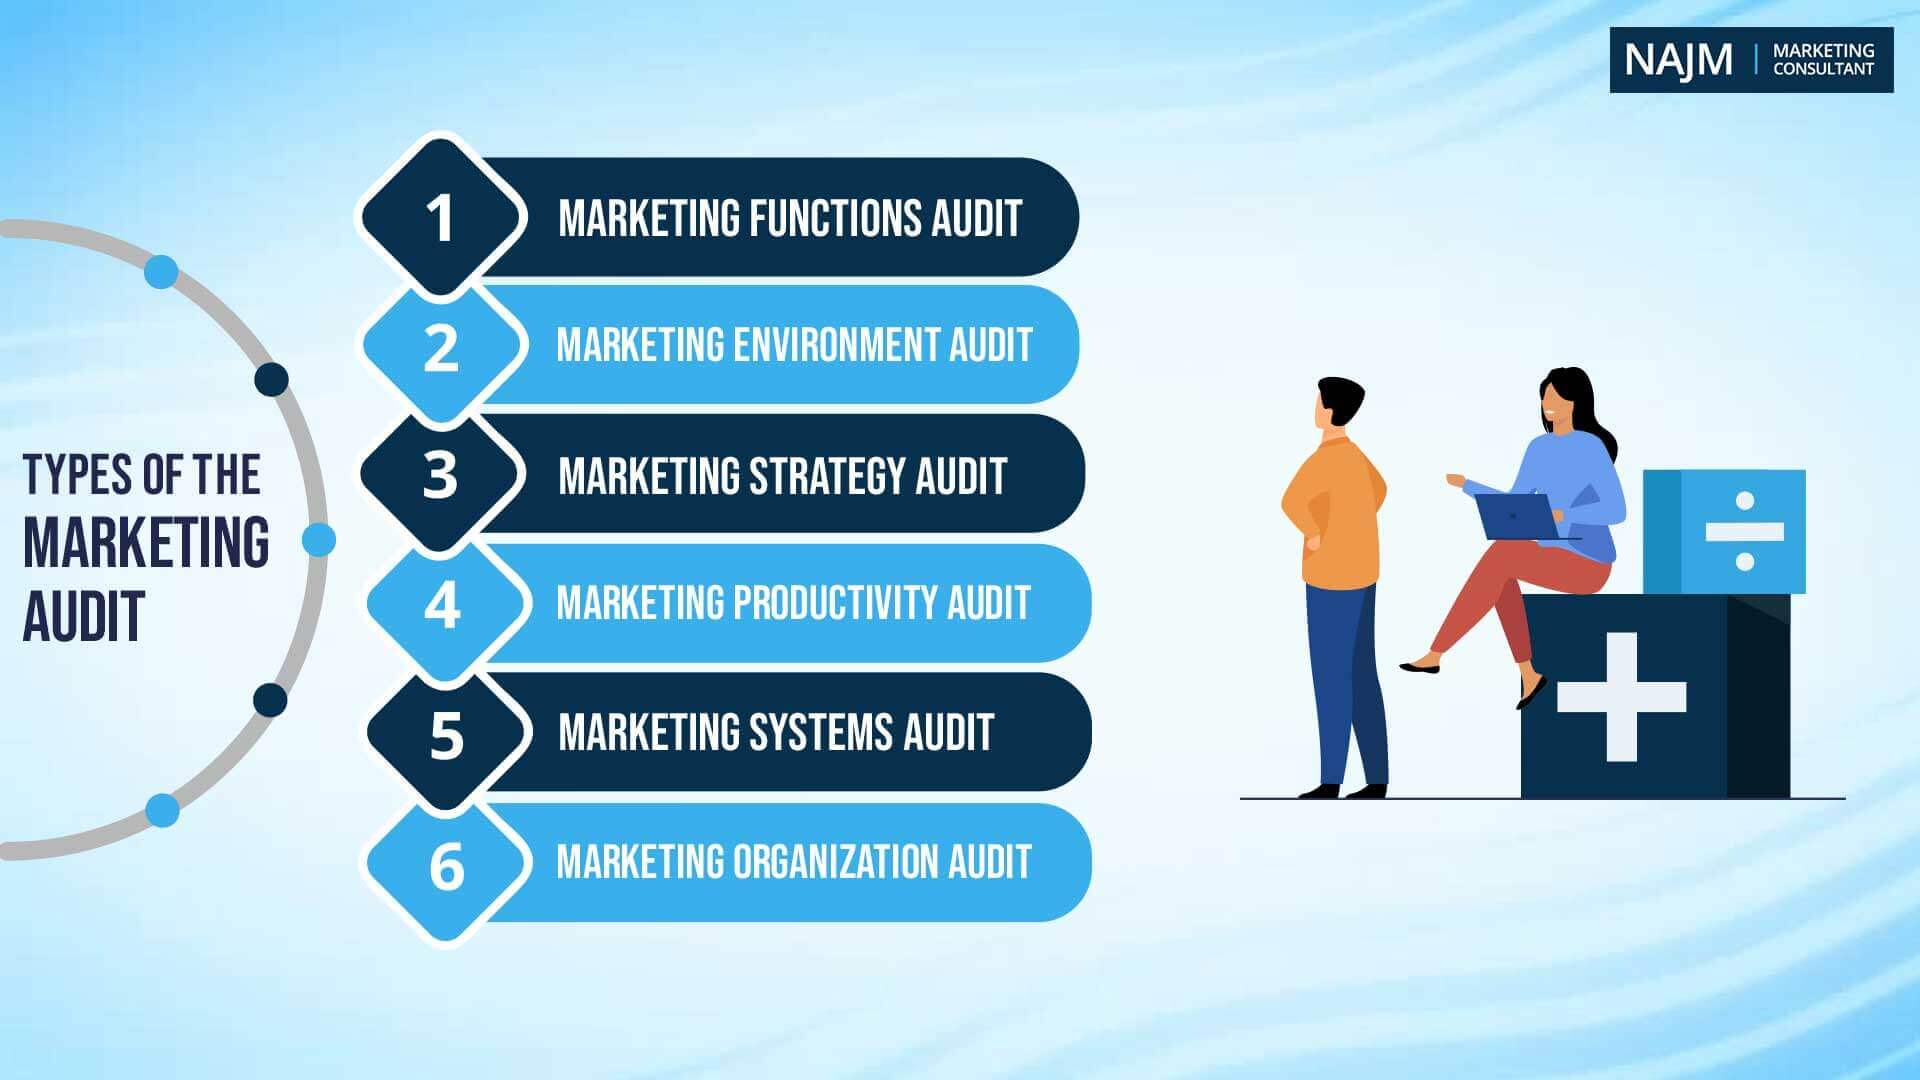 Types of the marketing audit